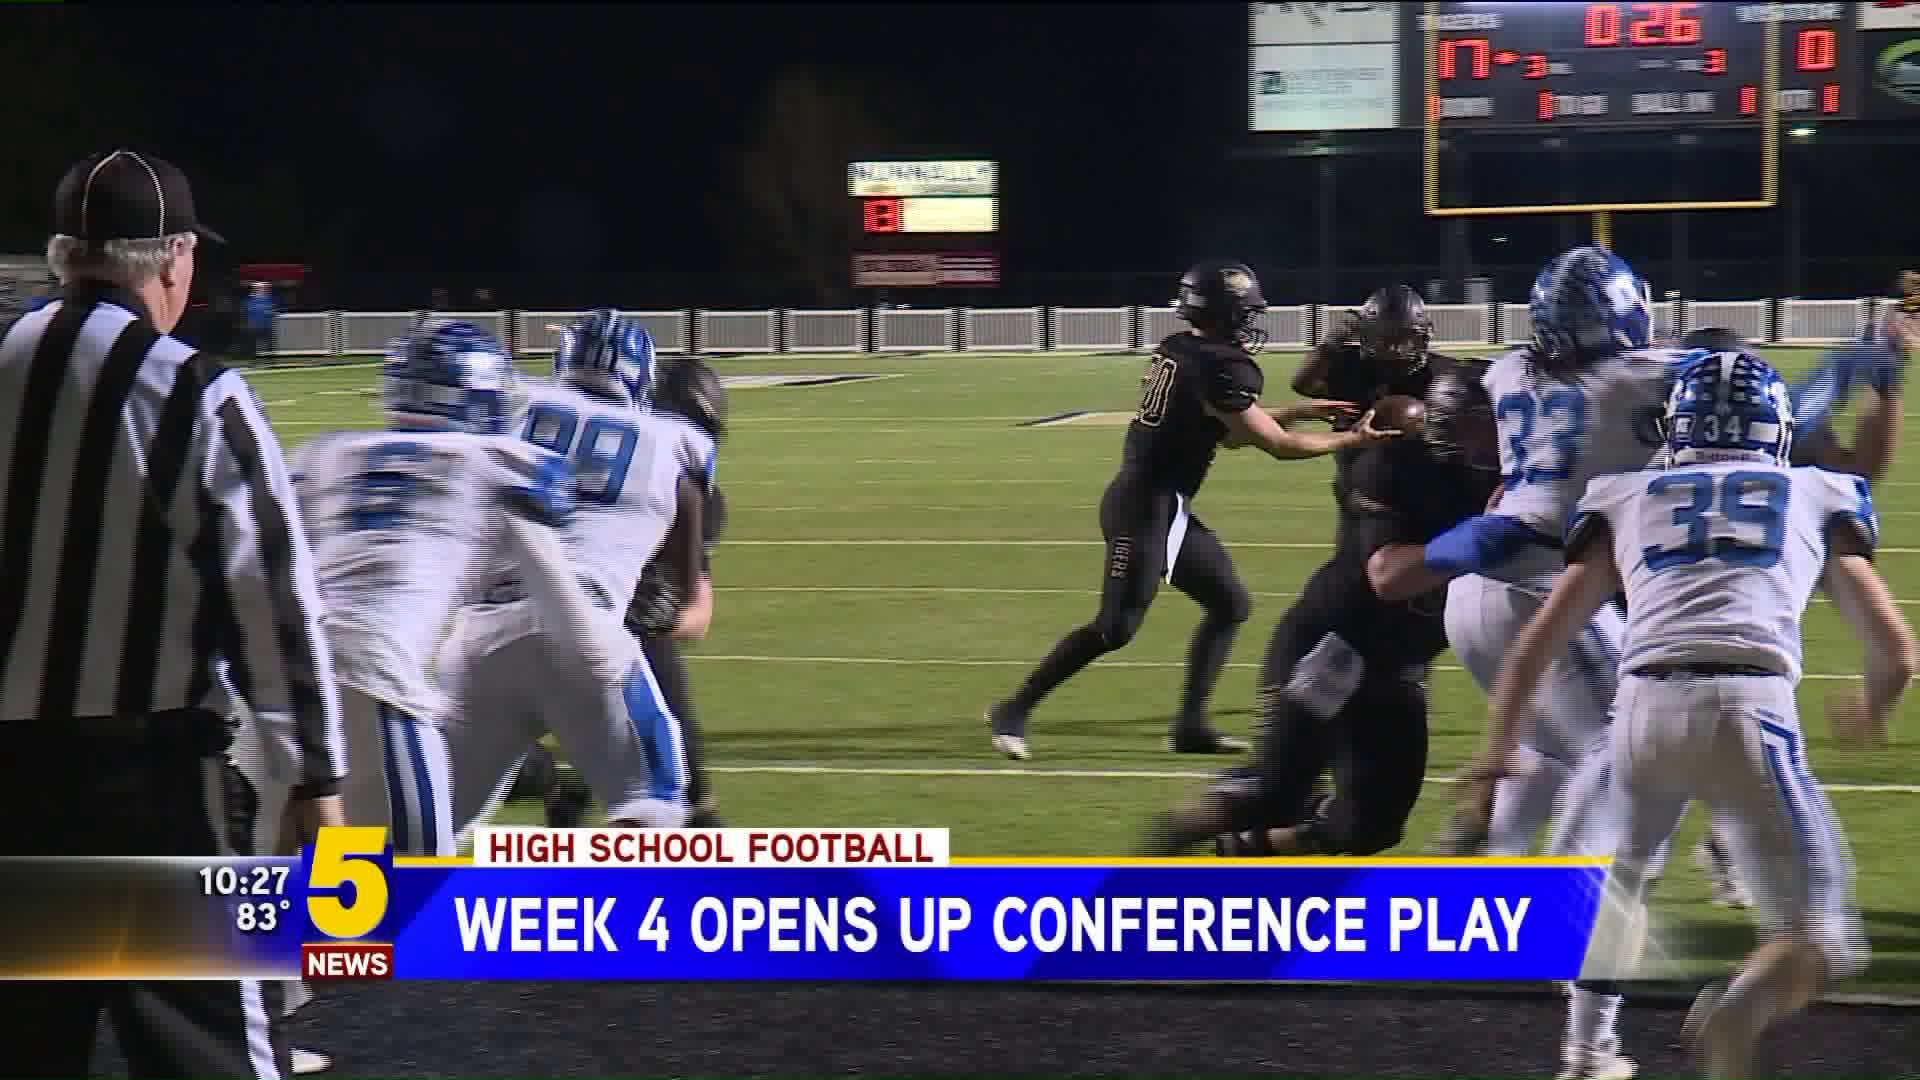 7A-West Looks Different Starting League Play